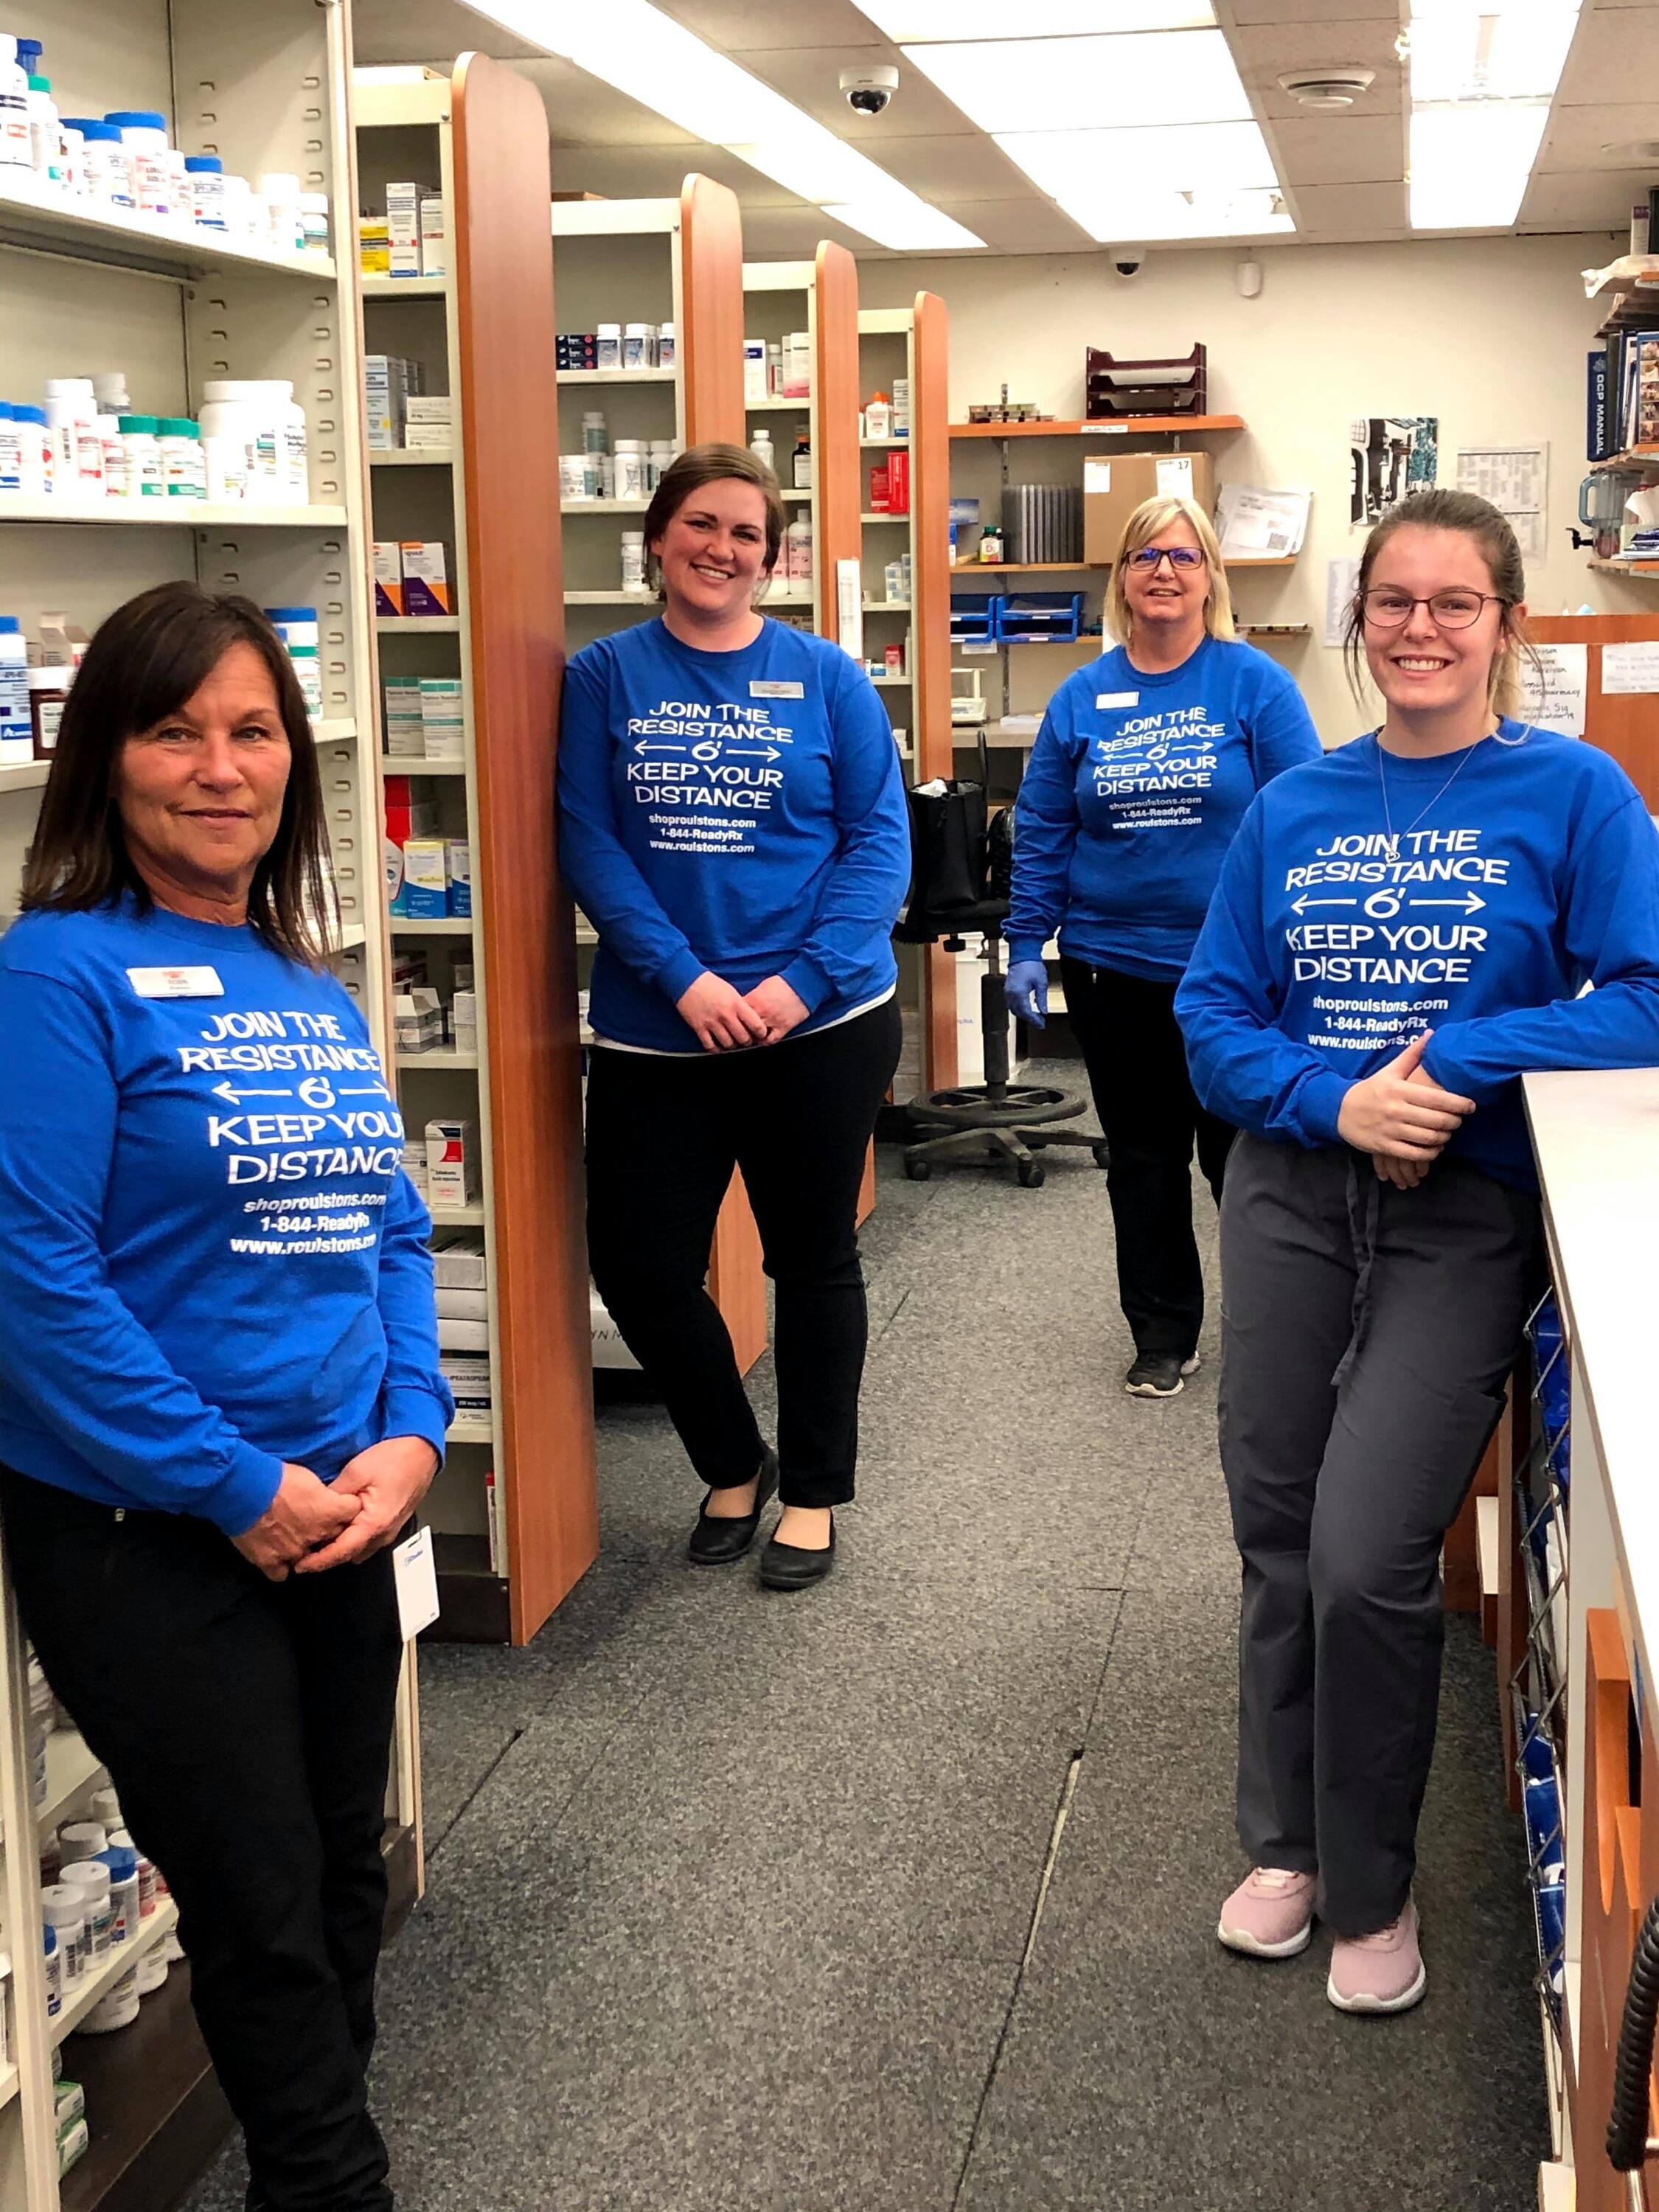 Allison and colleagues standing in the pharmacy